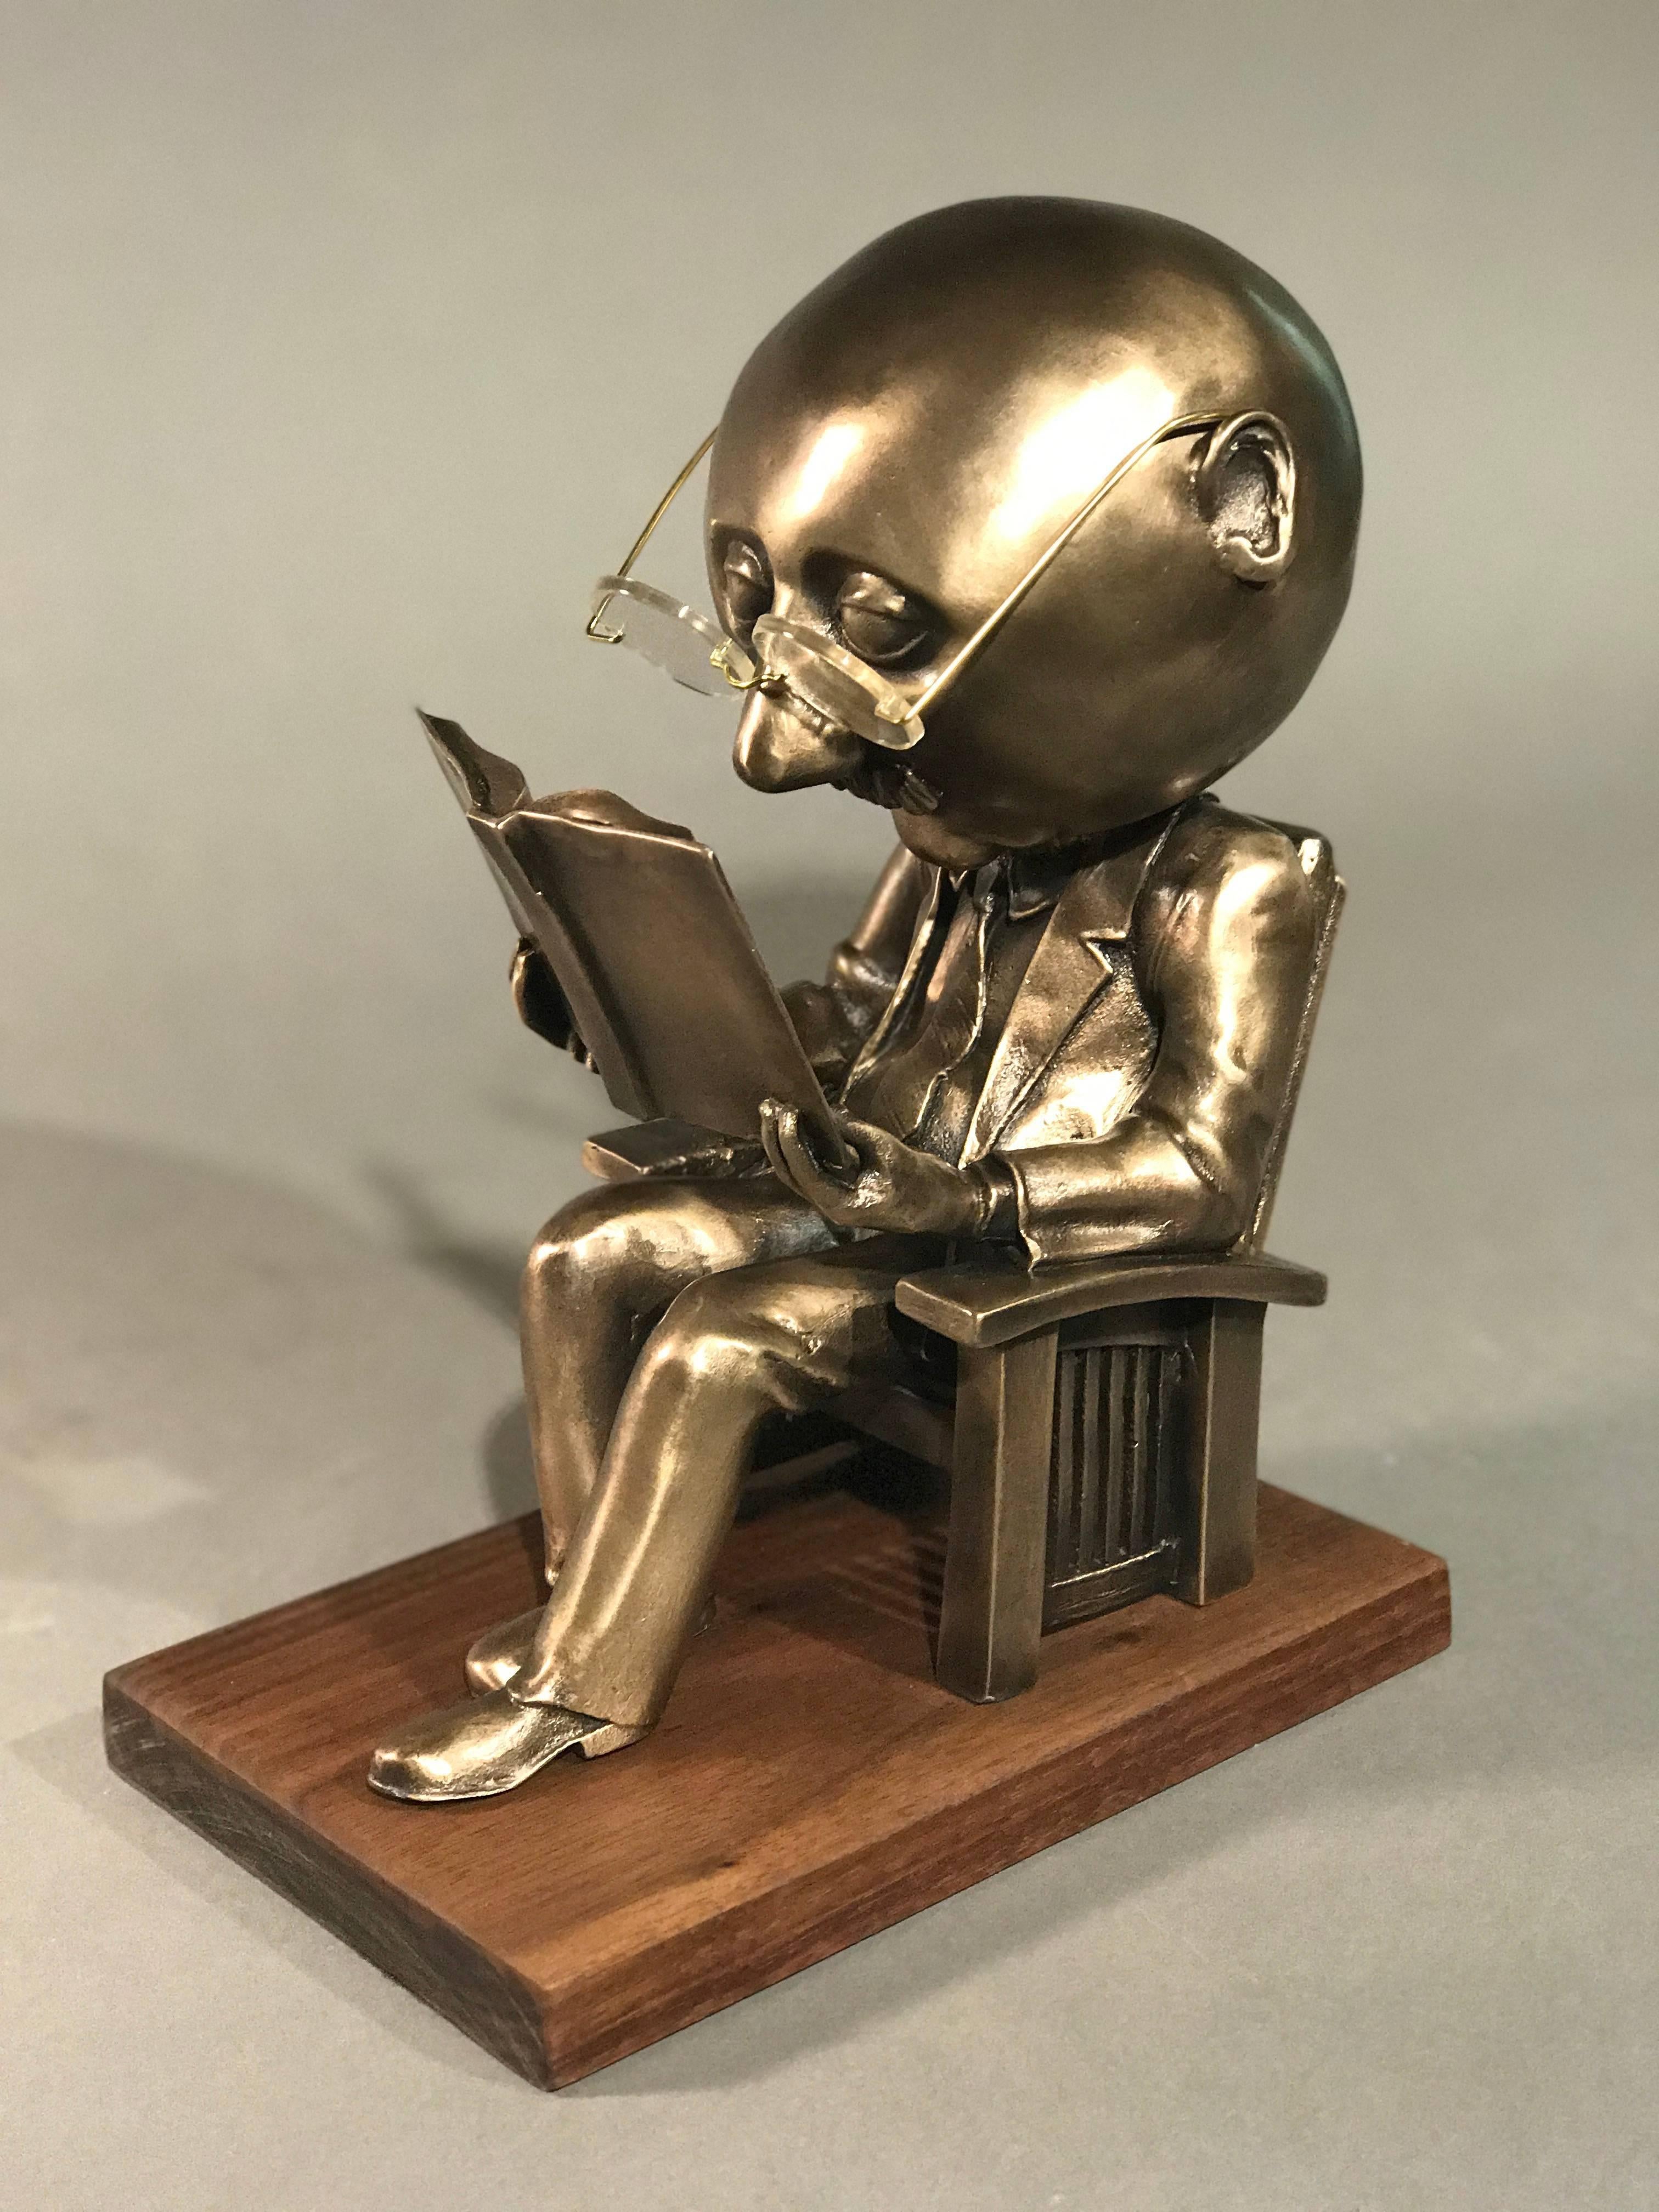 The Reader (small),Rodger Jacobsen gold bronze sculpture, reading book, glasses 

The Reader (small), gold bronze sculpture, reading book, glasses,Rodger Jacobsen

registered, numbered, edition 100

University of Tulsa Library has one of the larger